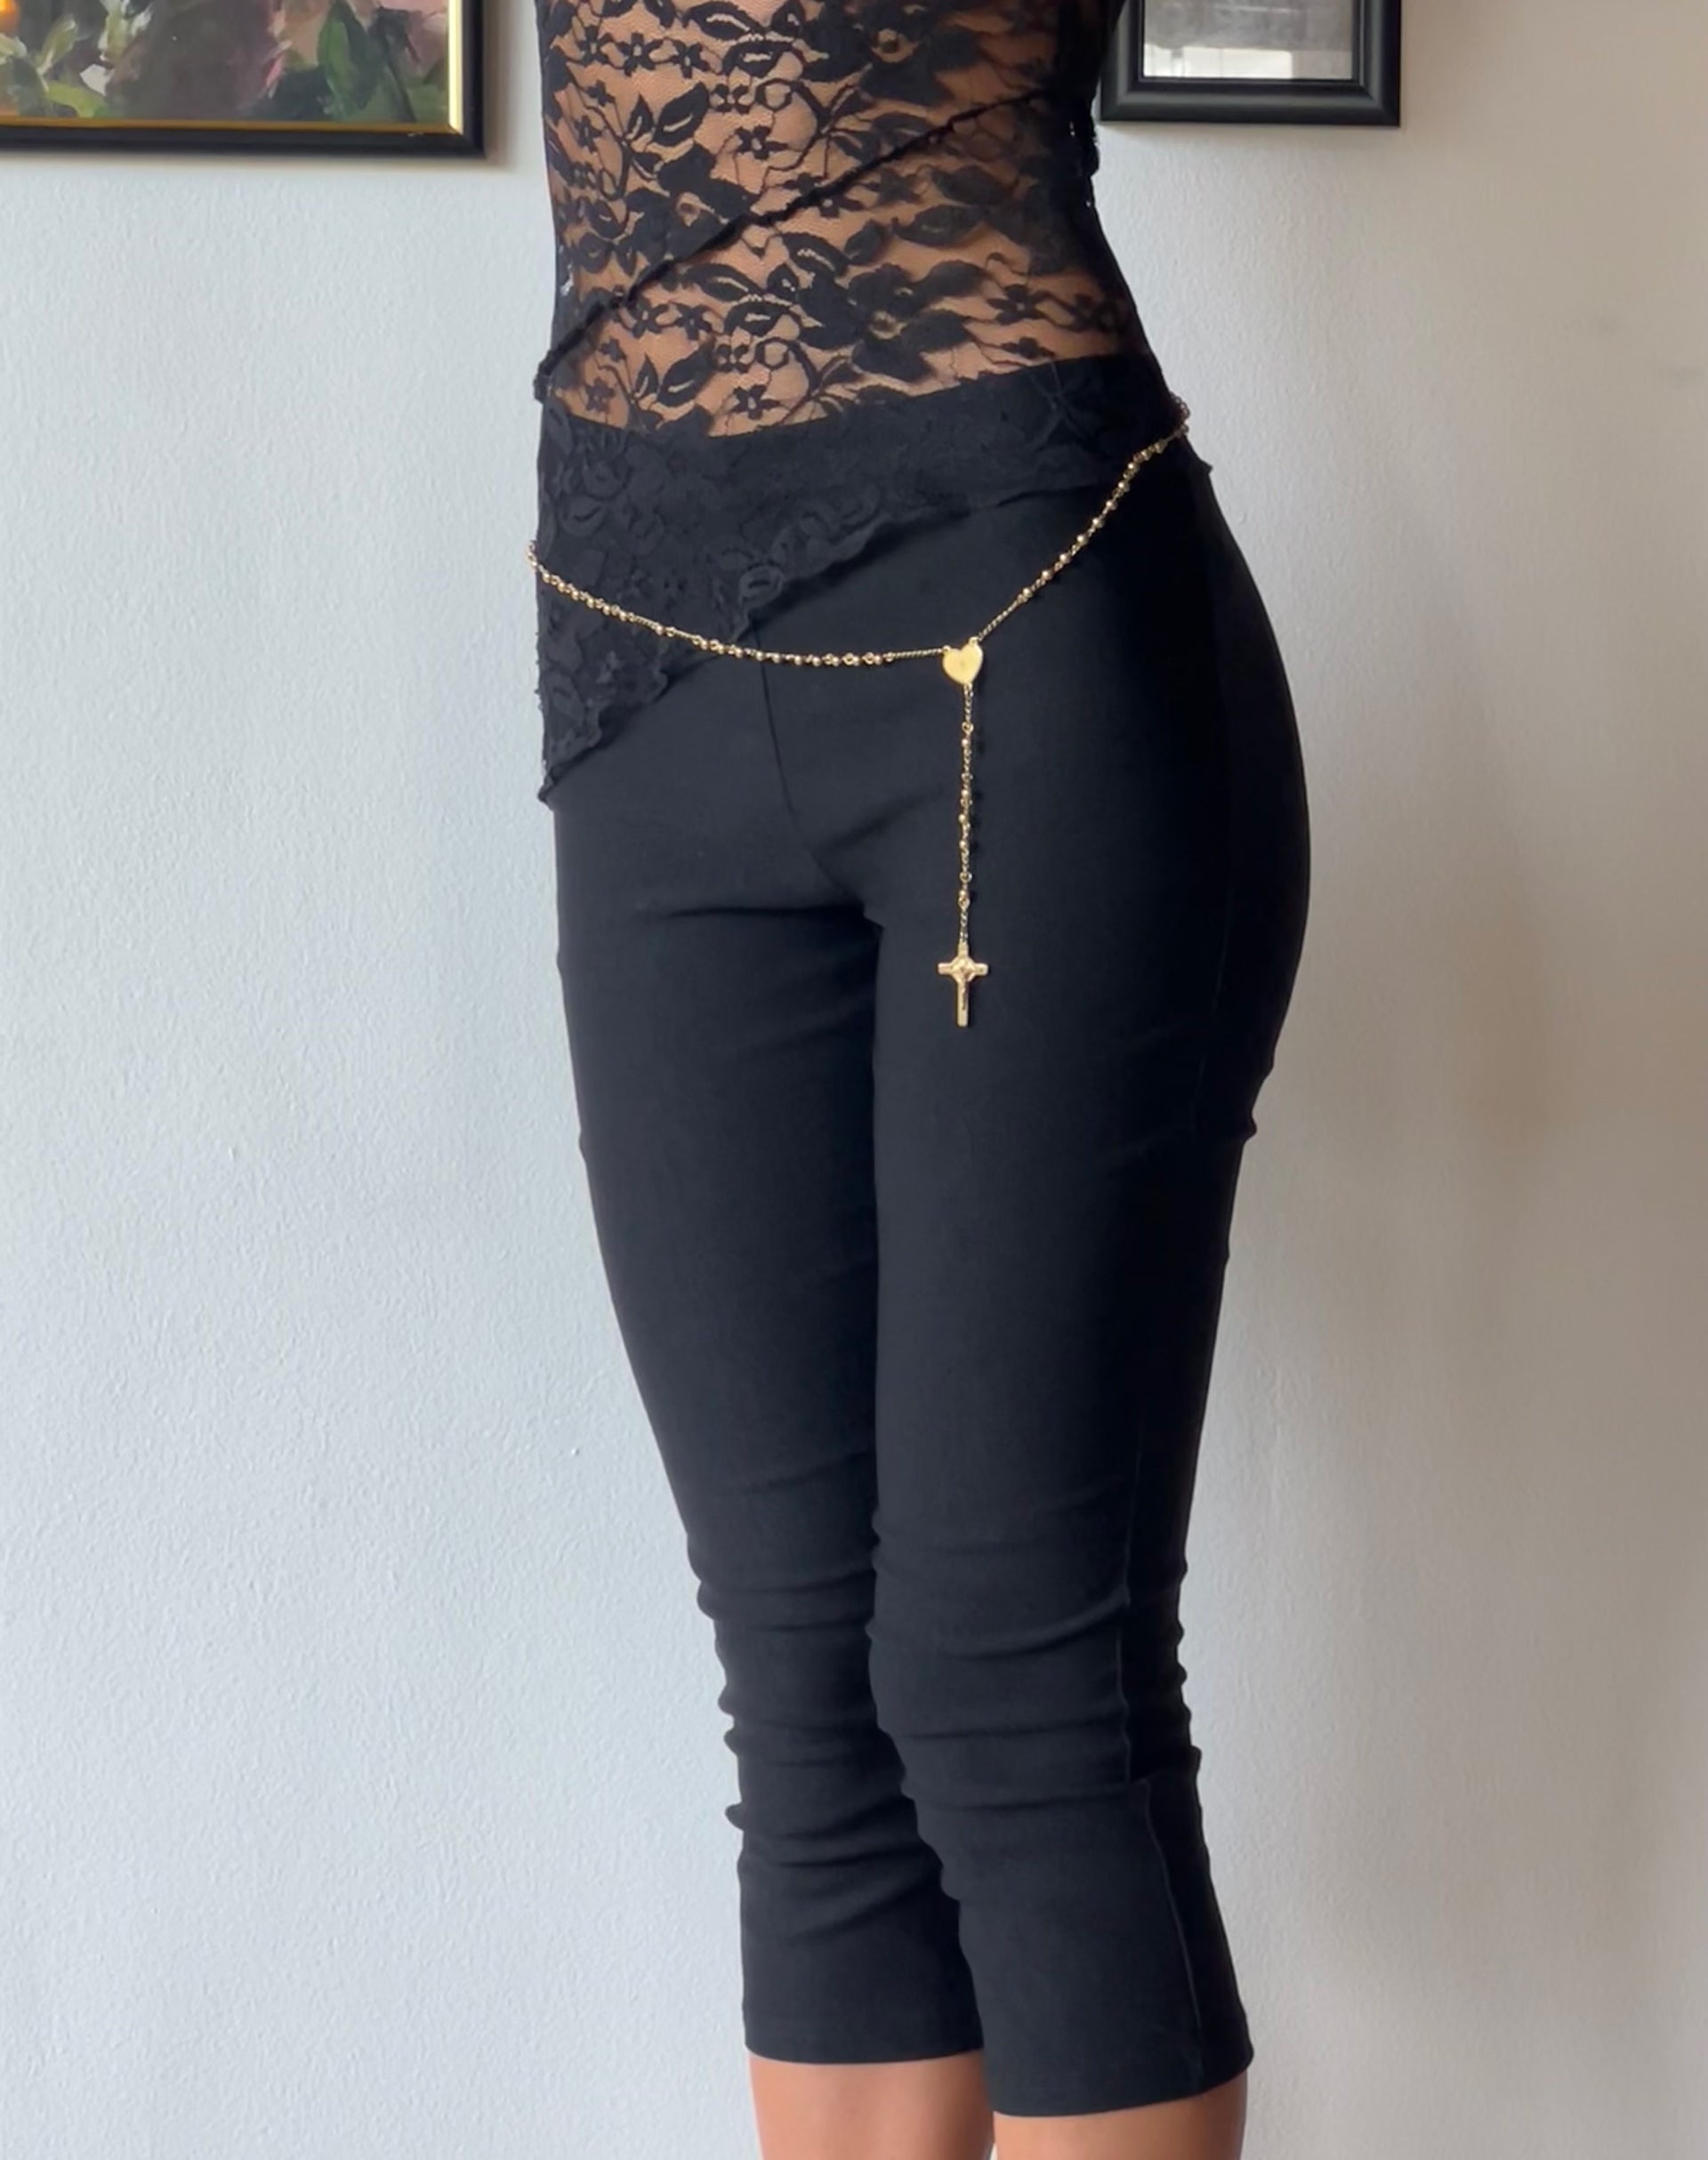 Cool Wholesale black lace capri legging In Any Size And Style